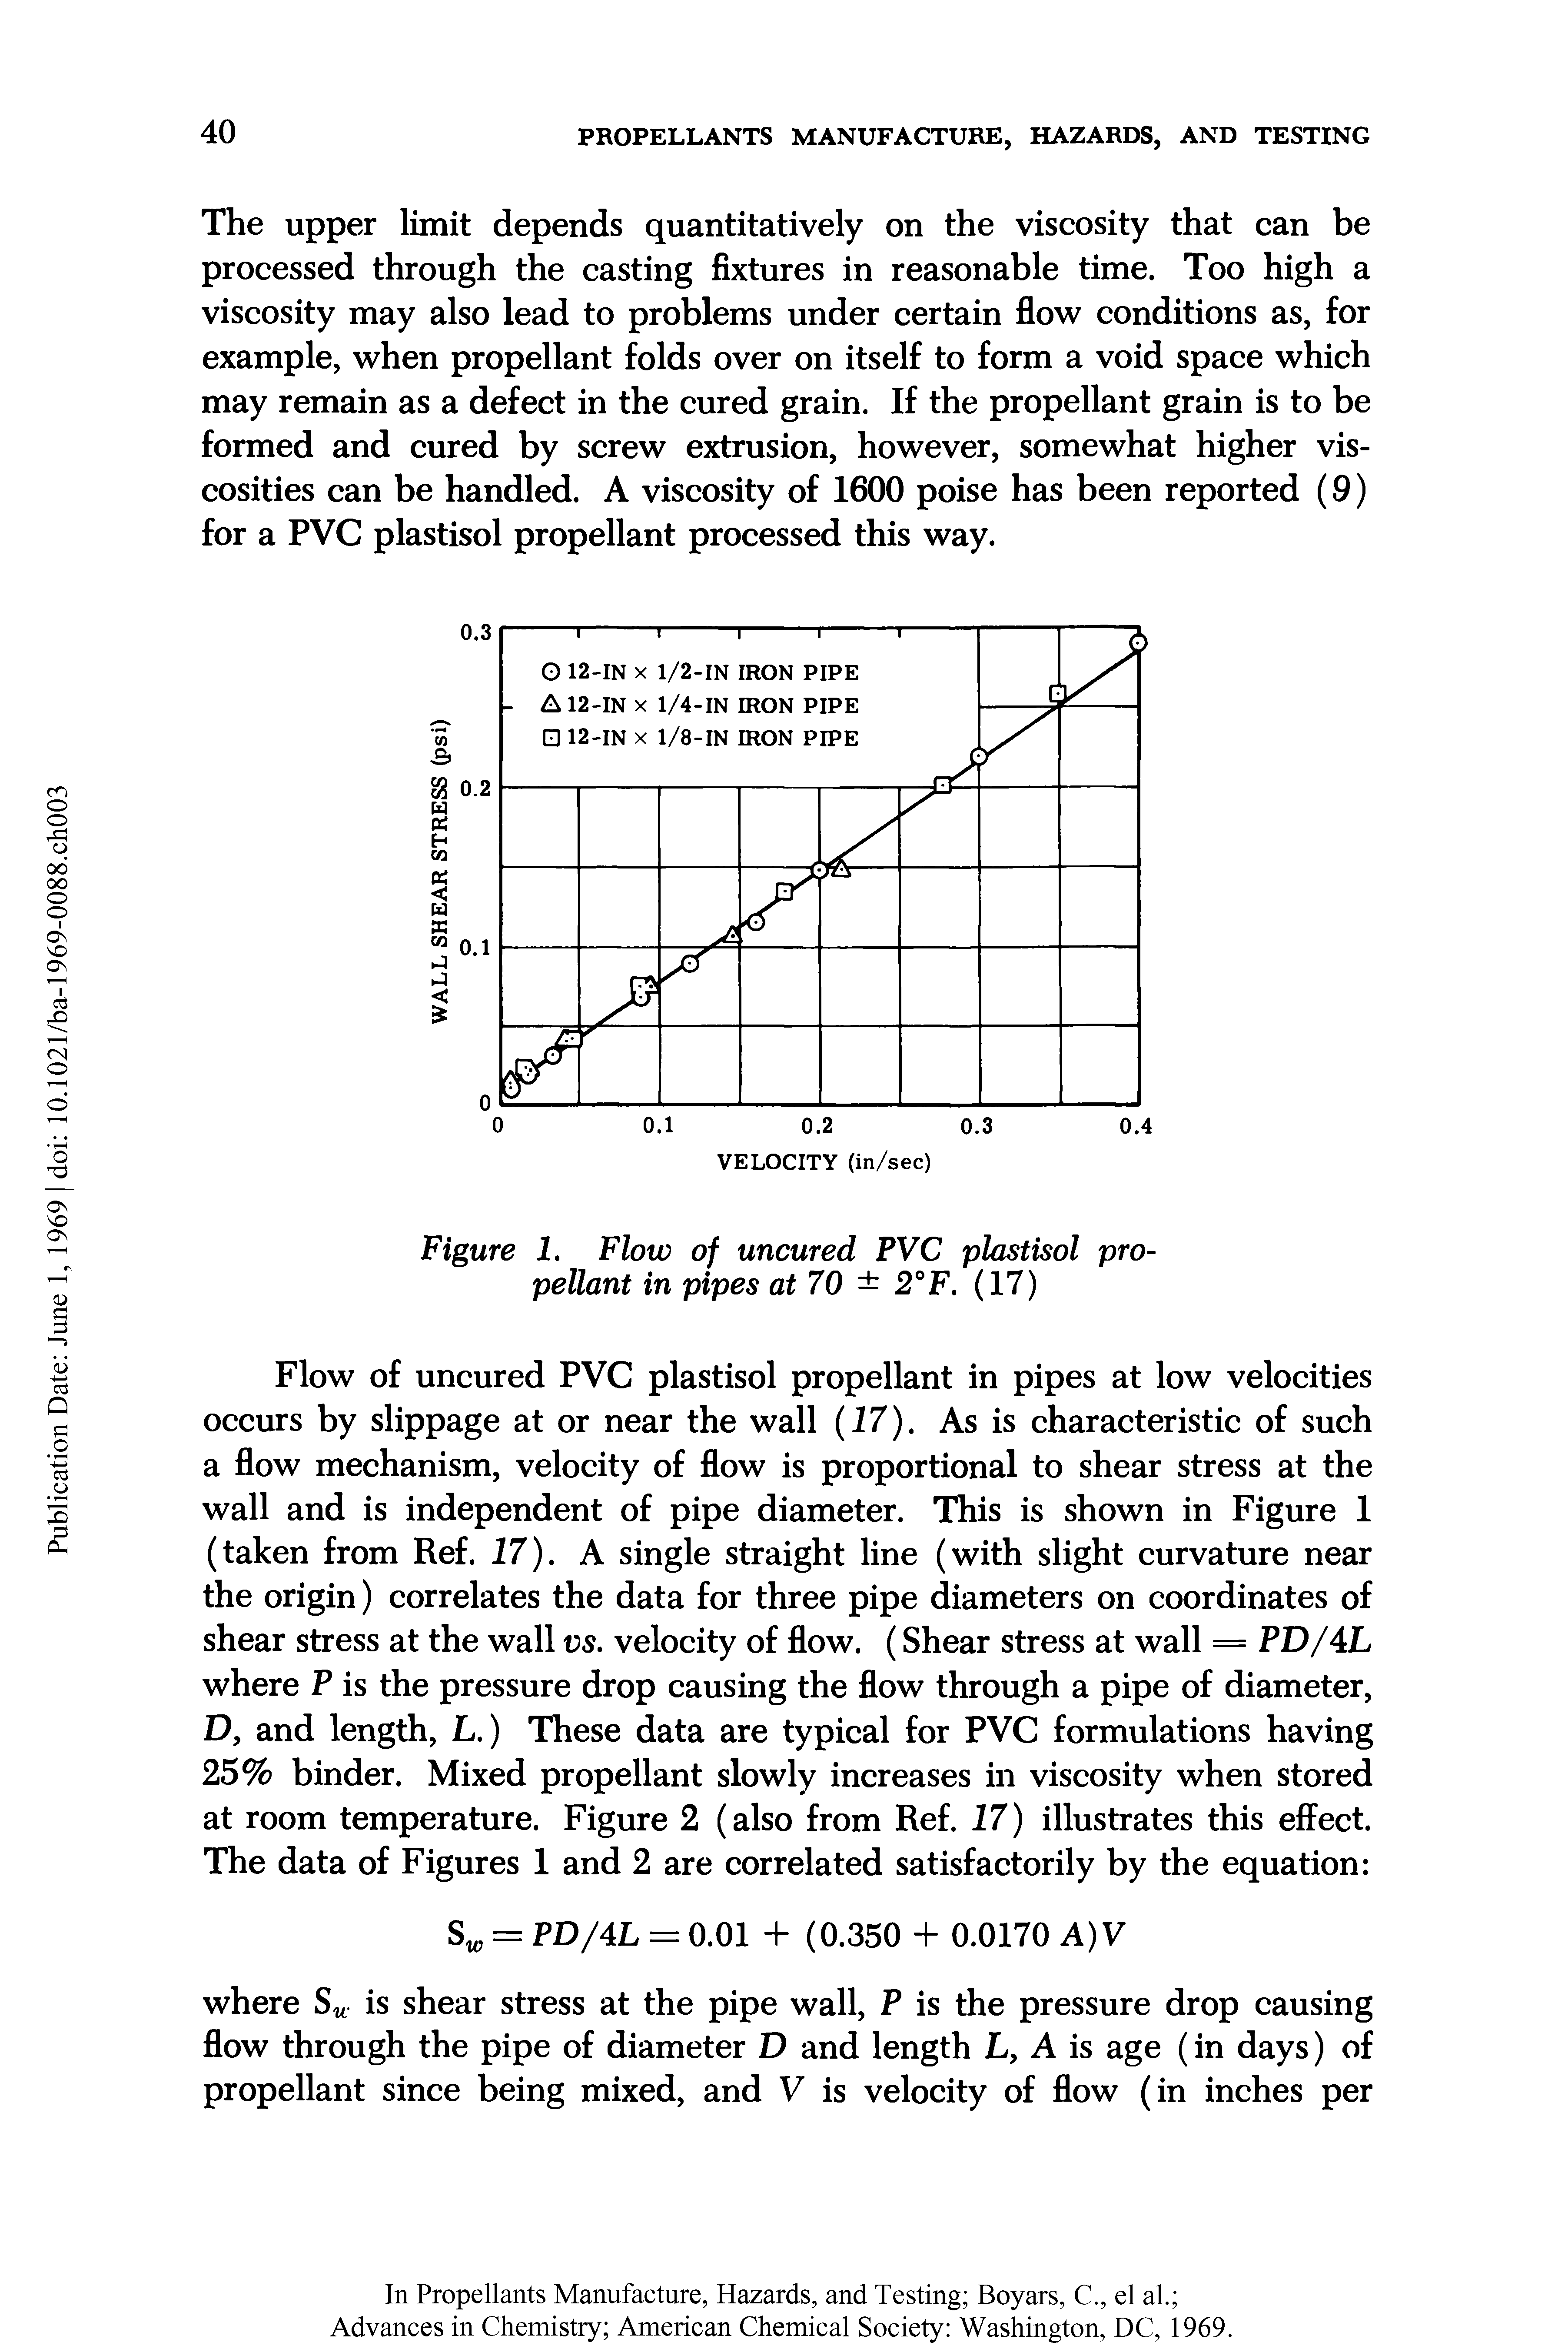 Figure 1. Flow of uncured PVC plastisol propellant in pipes at 70 2°F. (17)...